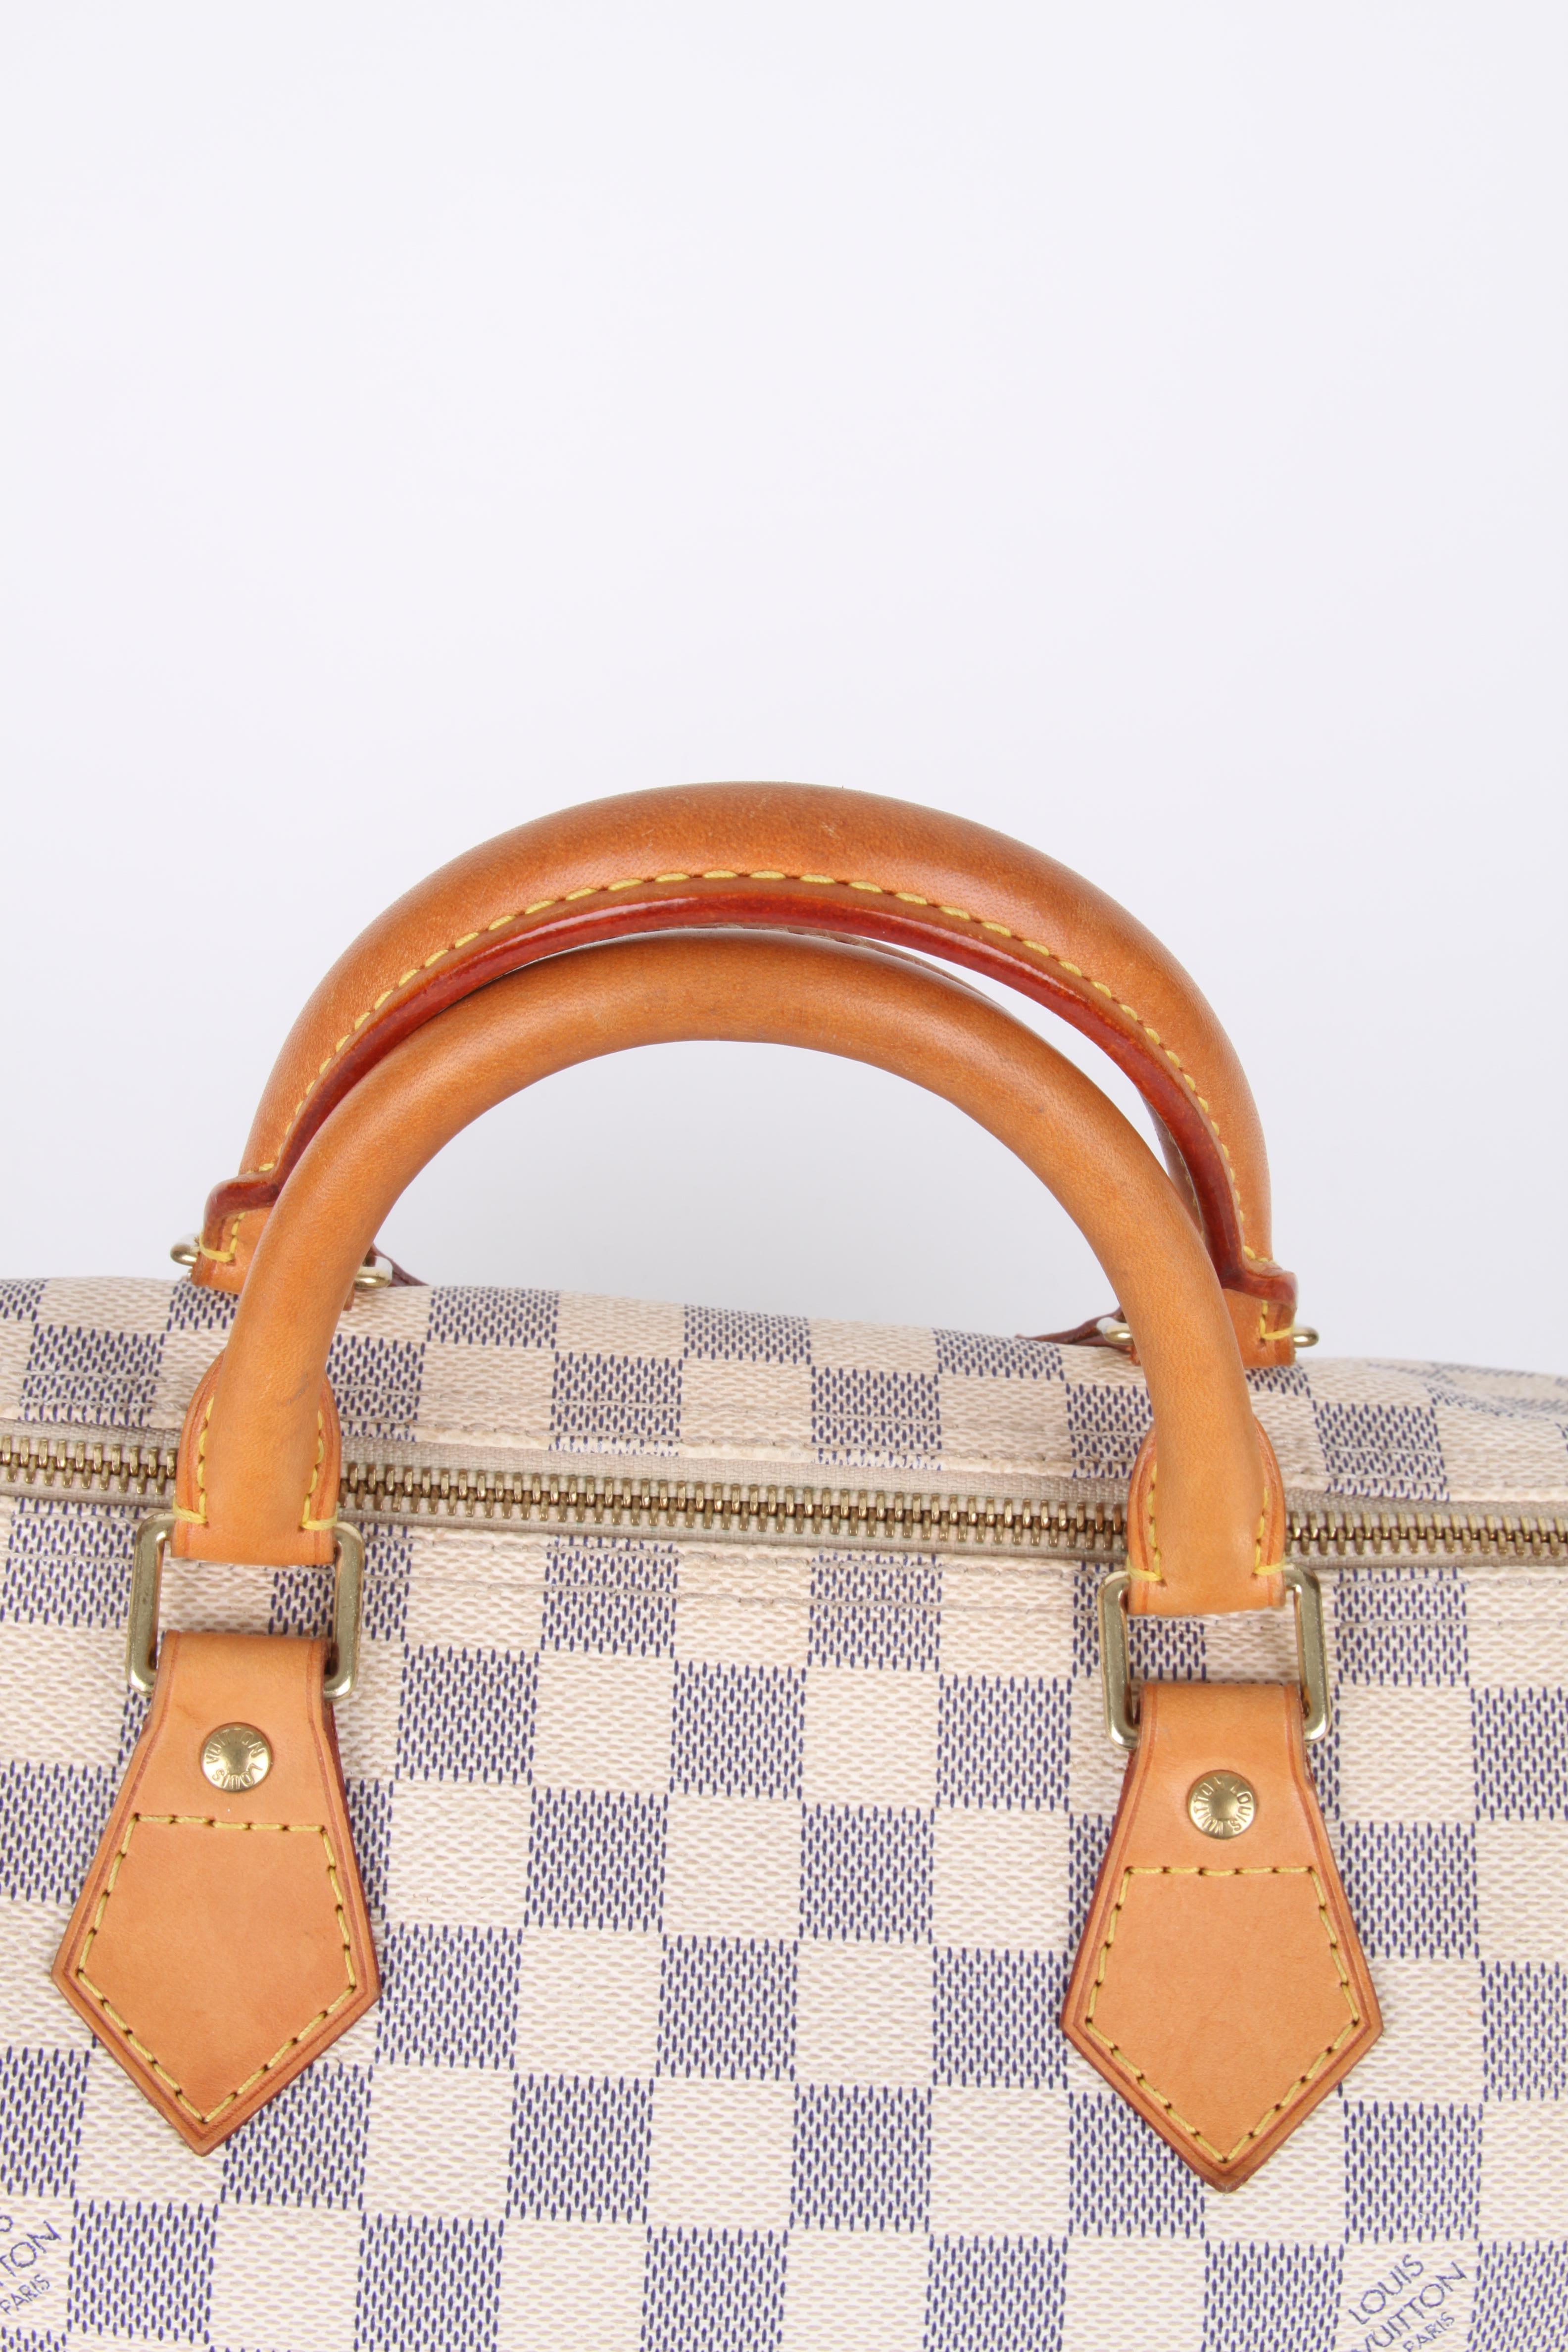 Louis Vuitton Speedy 30 Damier Azur Canvas Bag.

Fashioned from luminous Damier Azur canvas, the Speedy 30 is an elegant, compact handbag, a stylish companion for city life. Launched in 1930 as the 